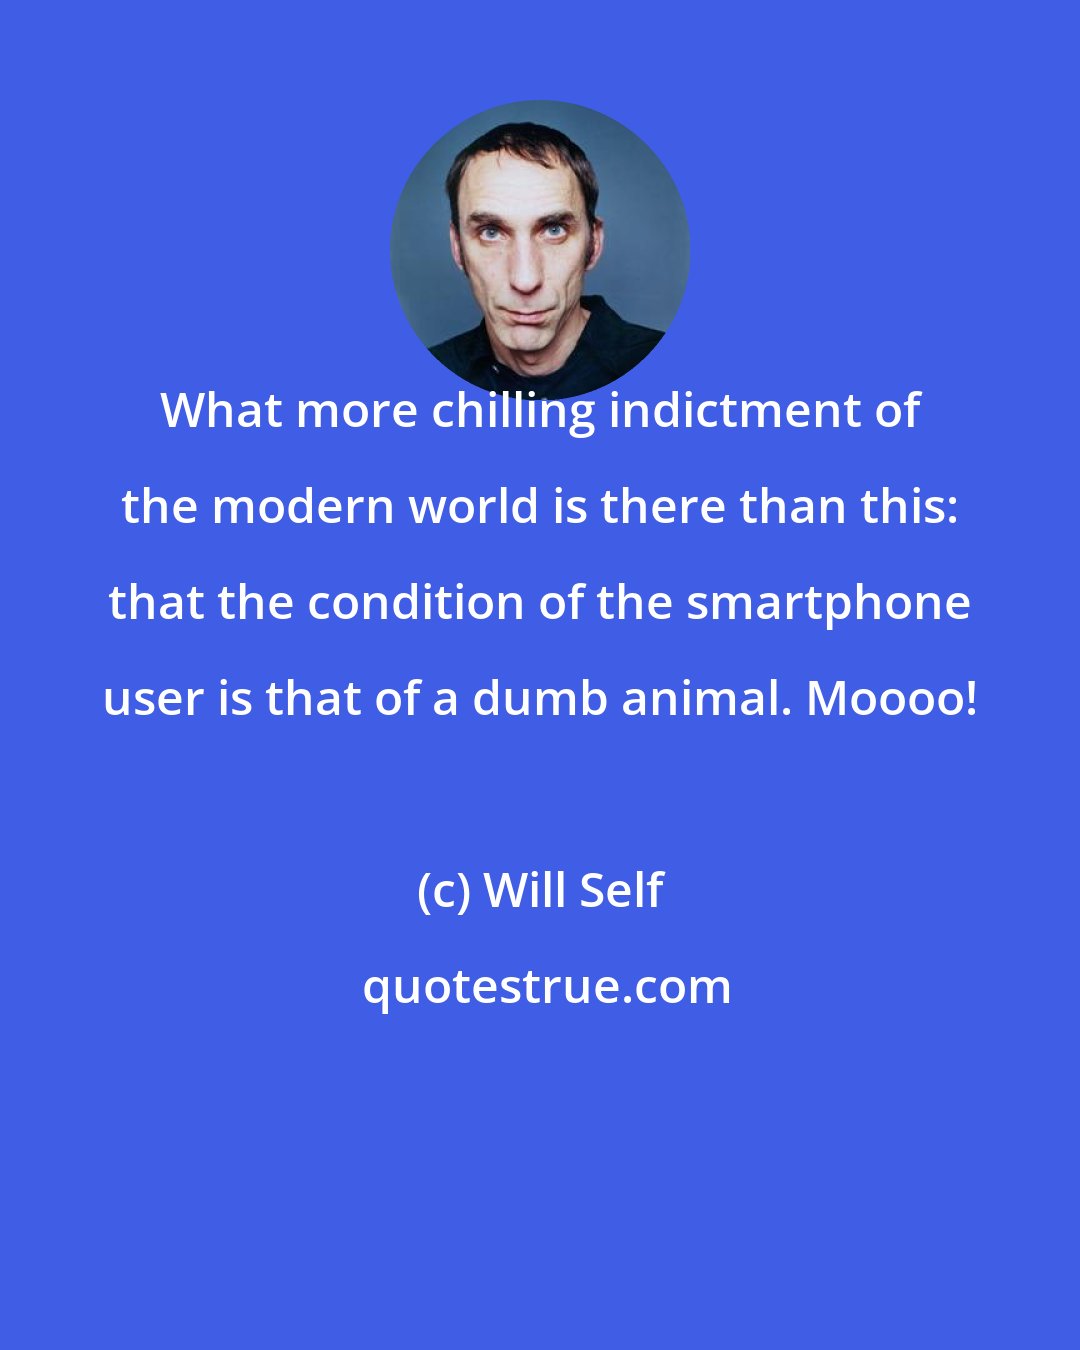 Will Self: What more chilling indictment of the modern world is there than this: that the condition of the smartphone user is that of a dumb animal. Moooo!